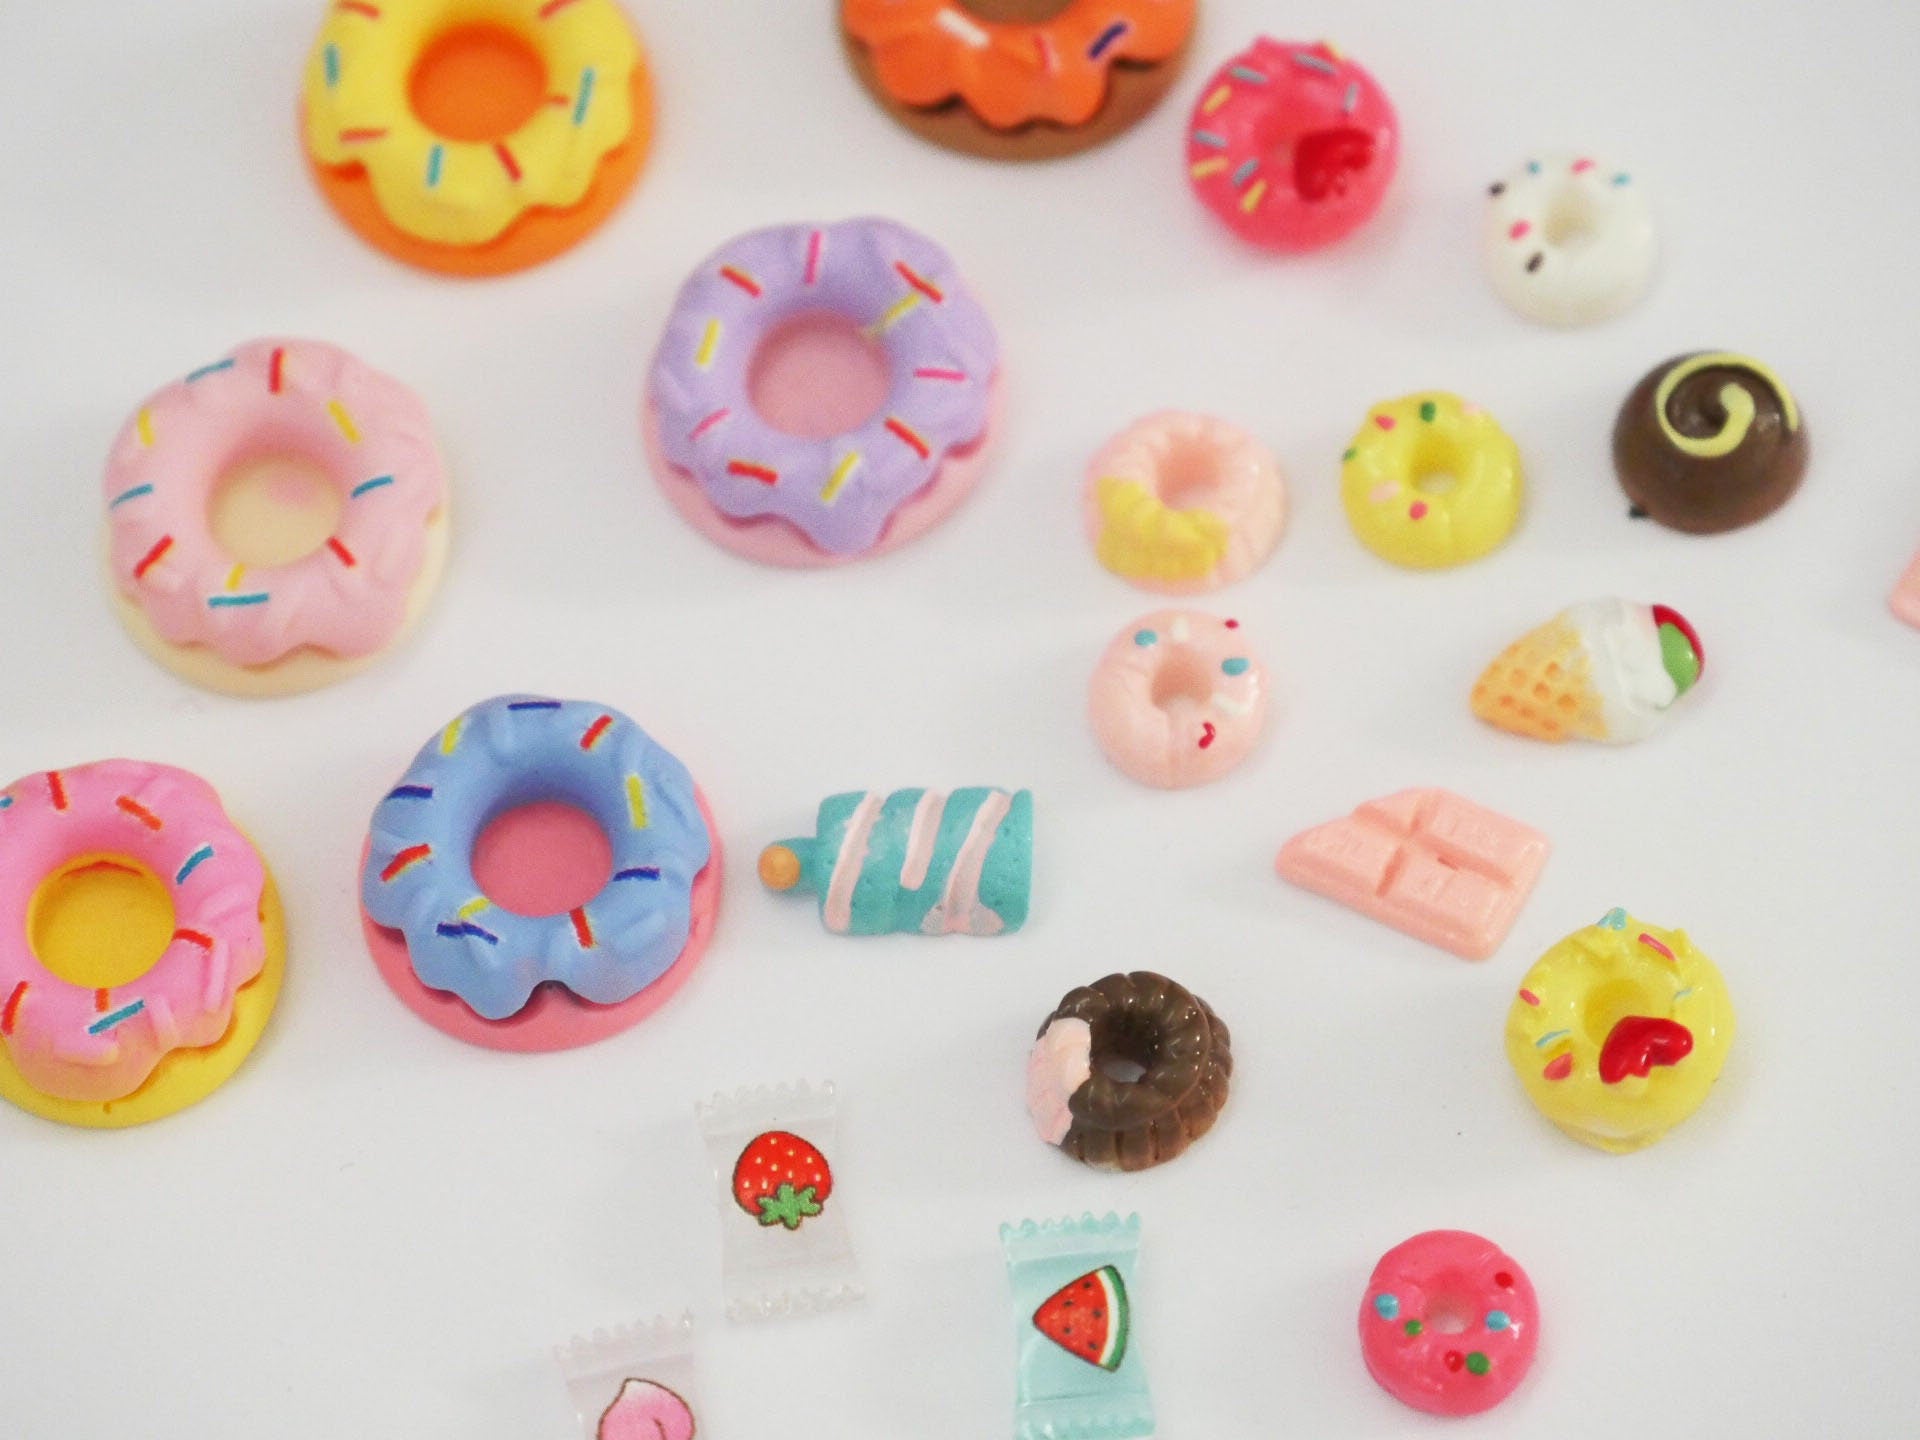 Miniature Donut Candy Sweets Nail Decal/ 3D Doll Afternoon Tea Charms / Chocolate Ice Cream Dessert Accessories Nail crafts